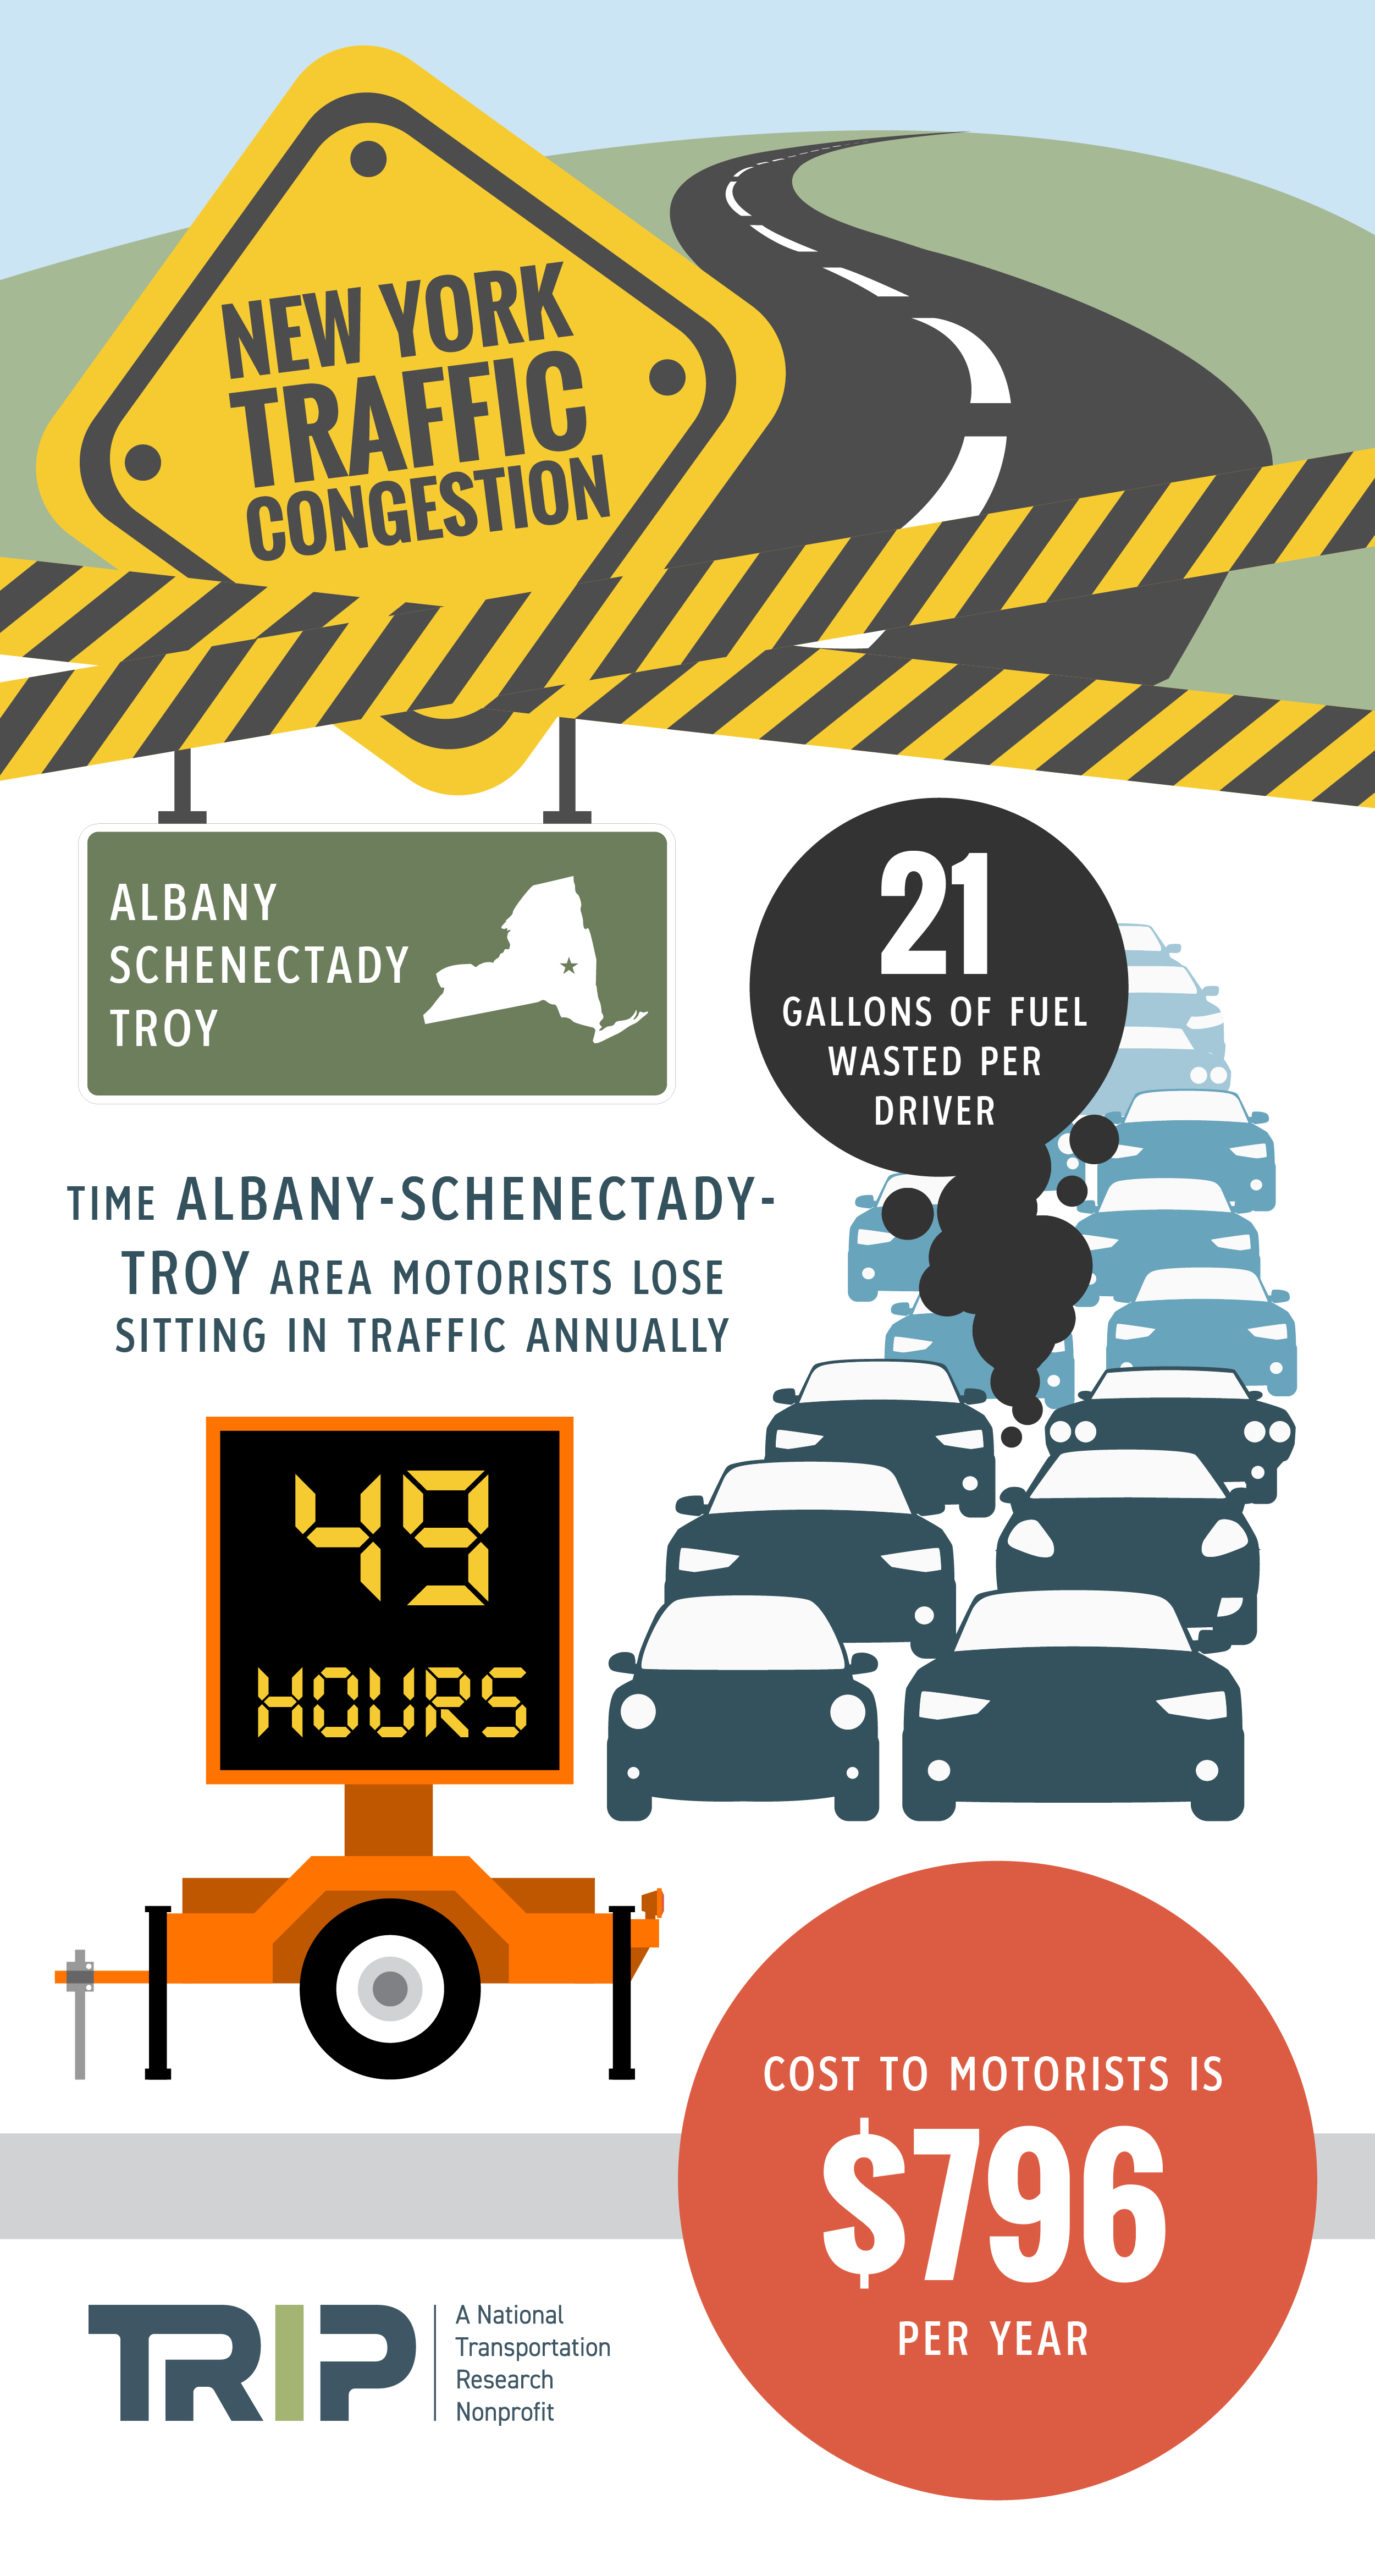 Albany-Schenectady-Troy Traffic Congestion Infographic – January 2022